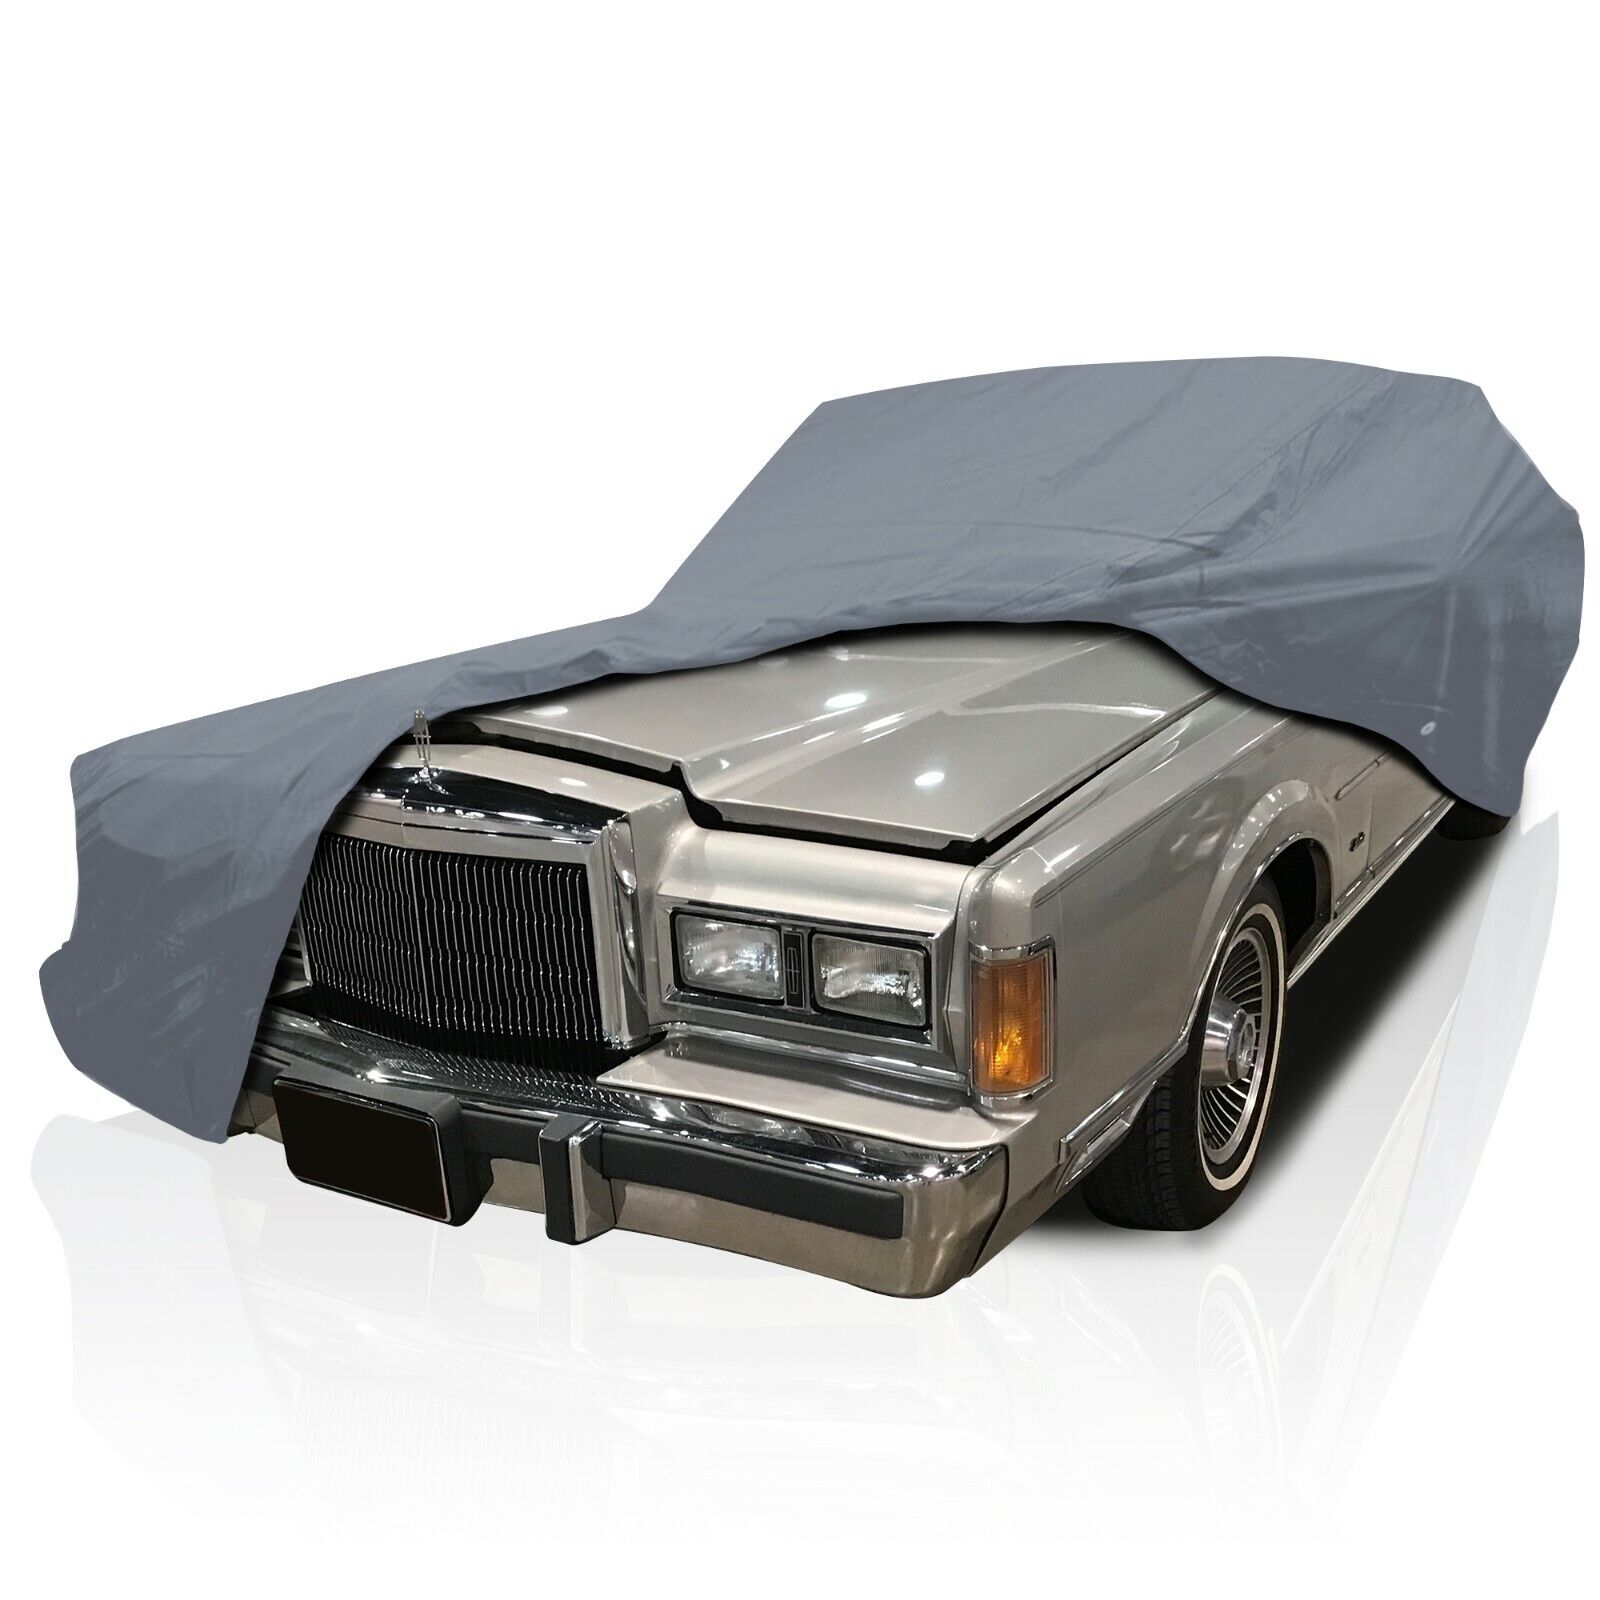 [CCT] 4 Layer Weather/Waterproof Full Car Cover For Lincoln Town Car [1981-1989]